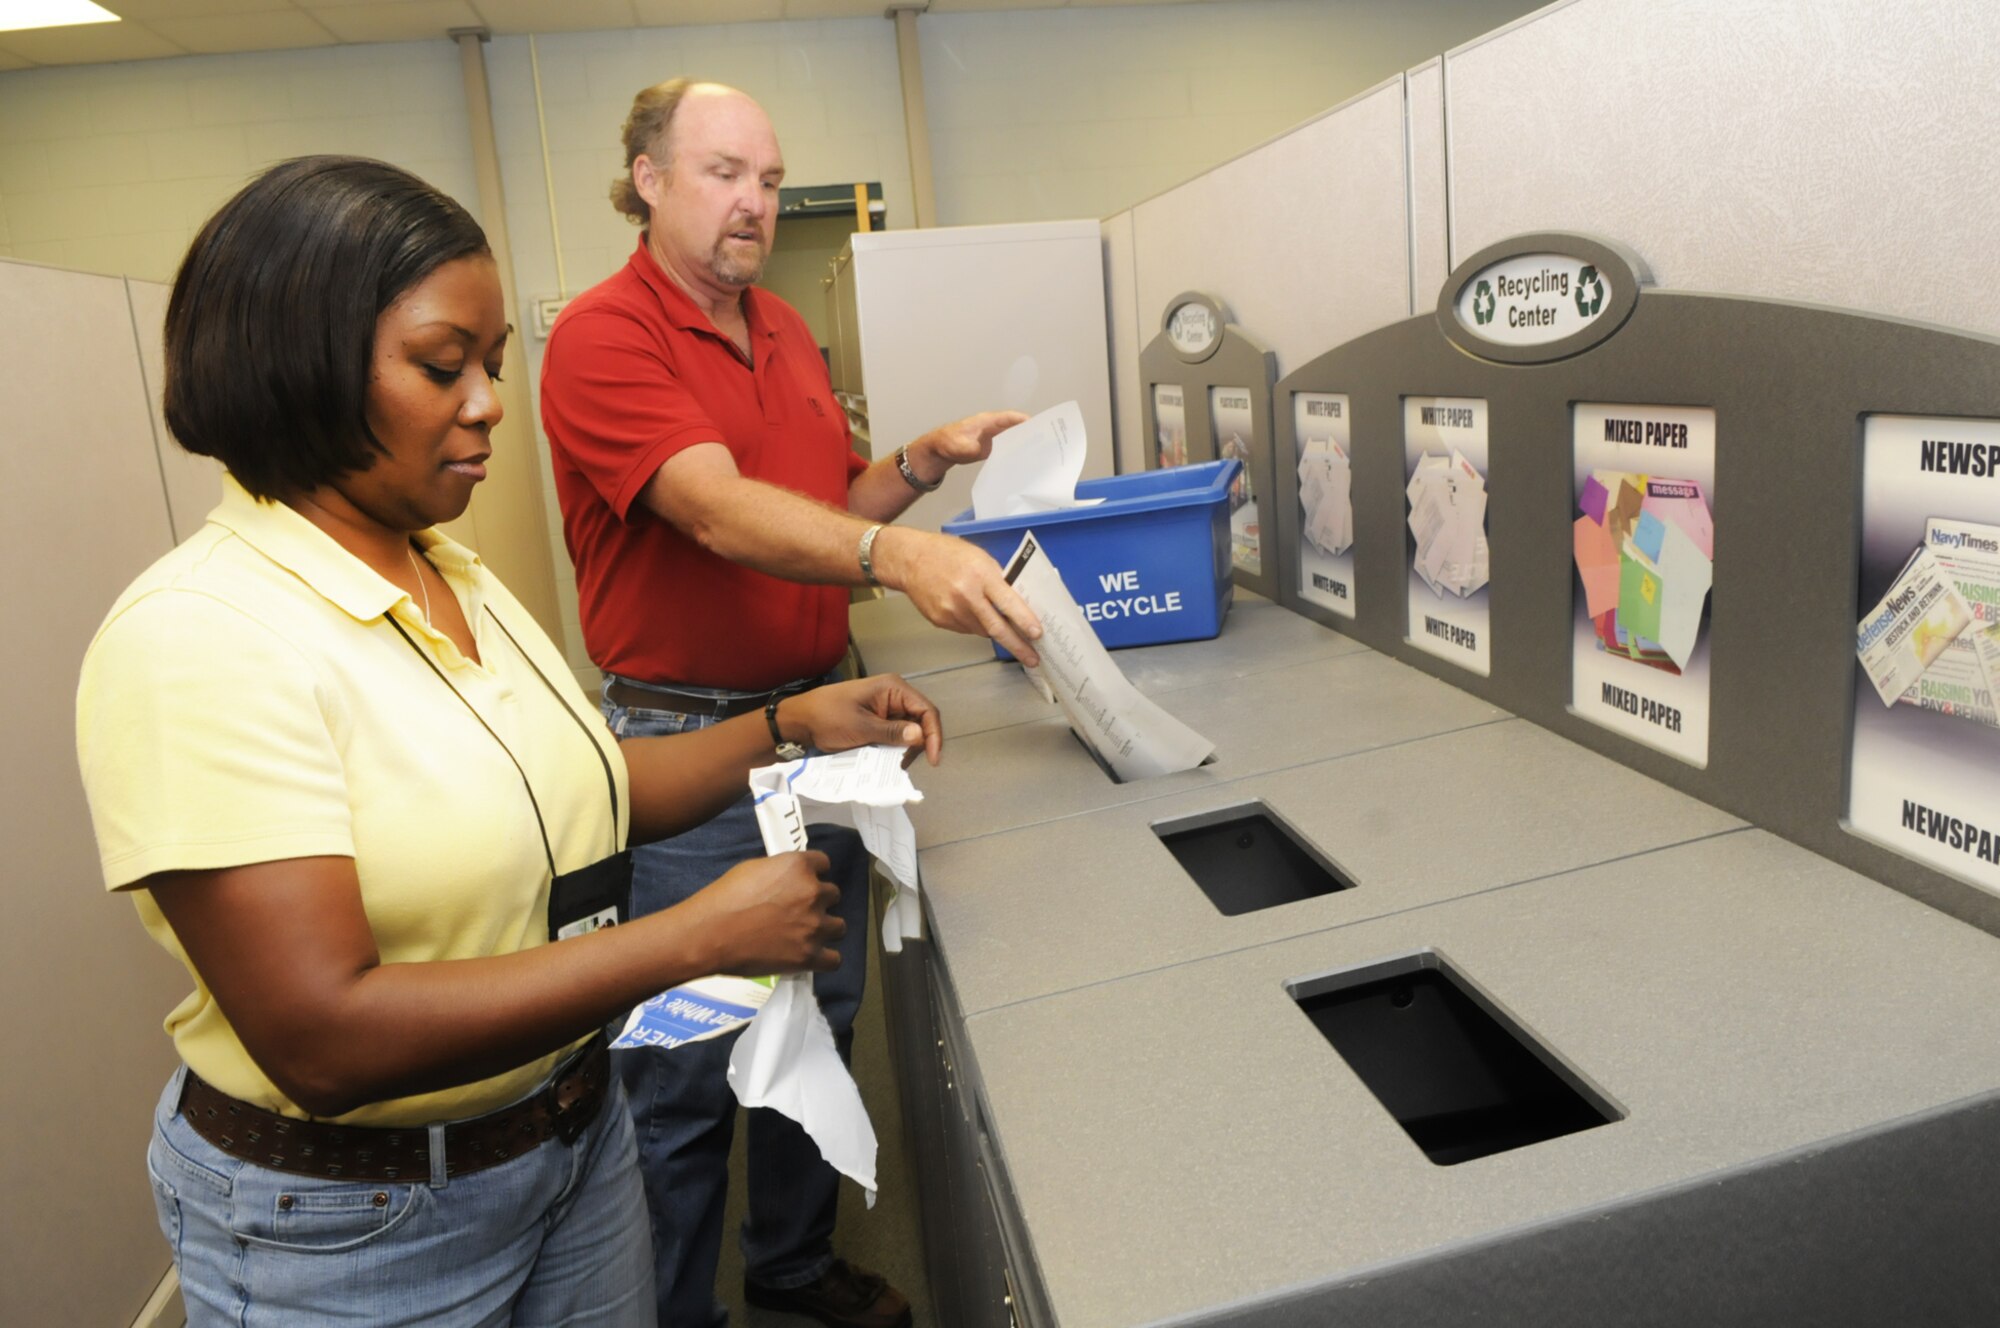 Ervanette Murry and Ken Wharam  place used paper in the appropriate containers of the recycling center in building 359. U. S. Air Force photo by Sue Sapp